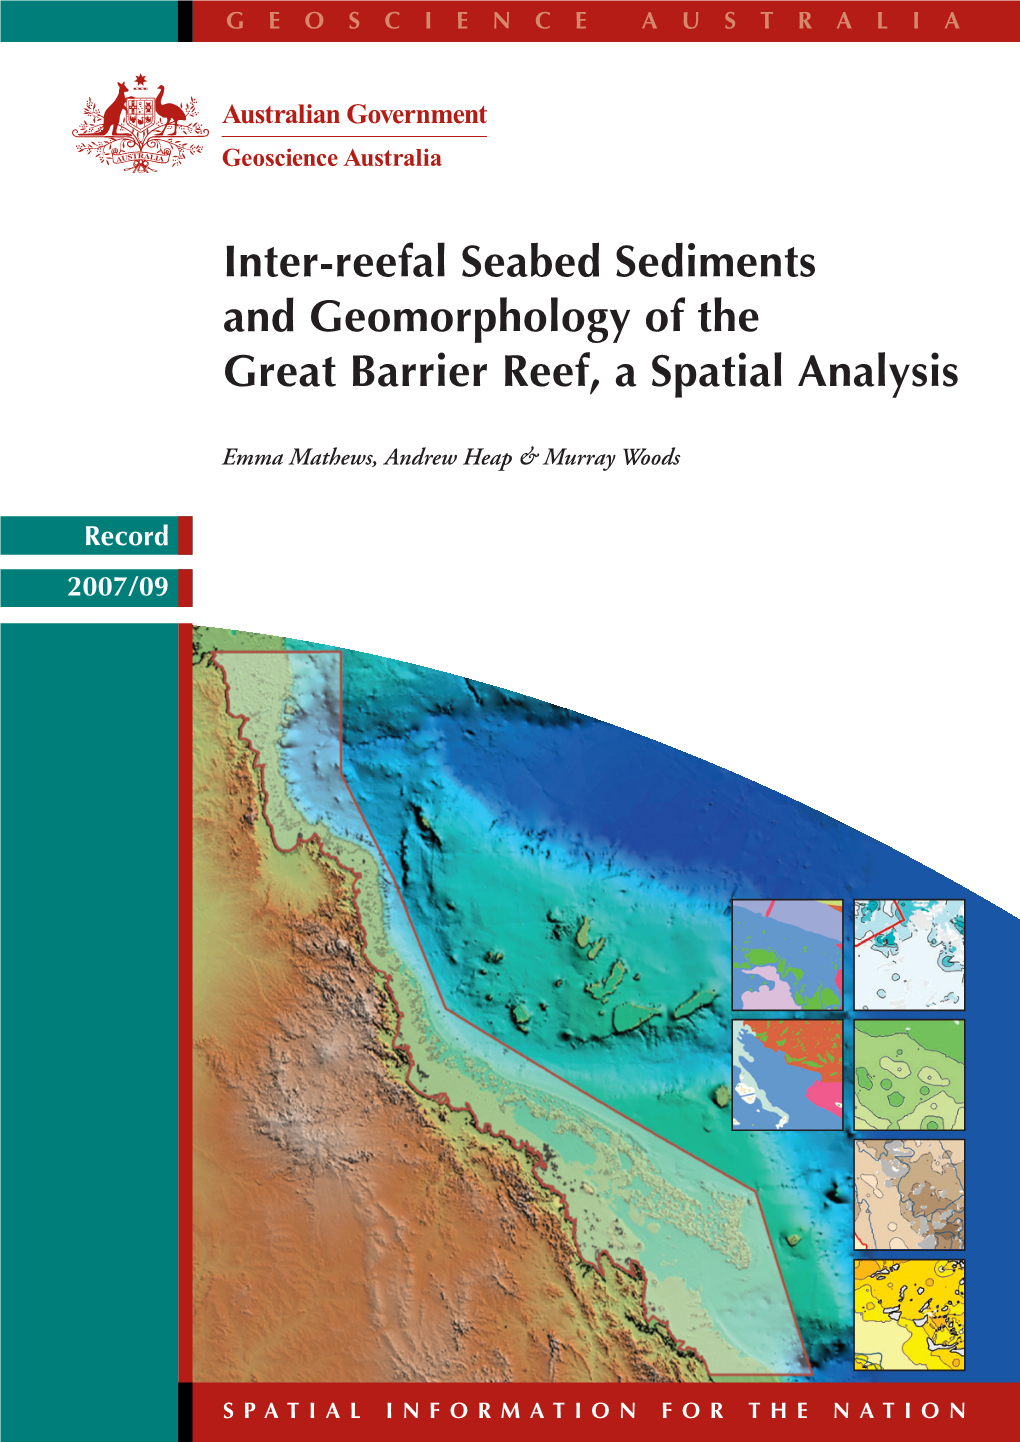 Inter-Reefal Seabed Sediments and Geomorphology of the Great Barrier Reef, a Spatial Analysis